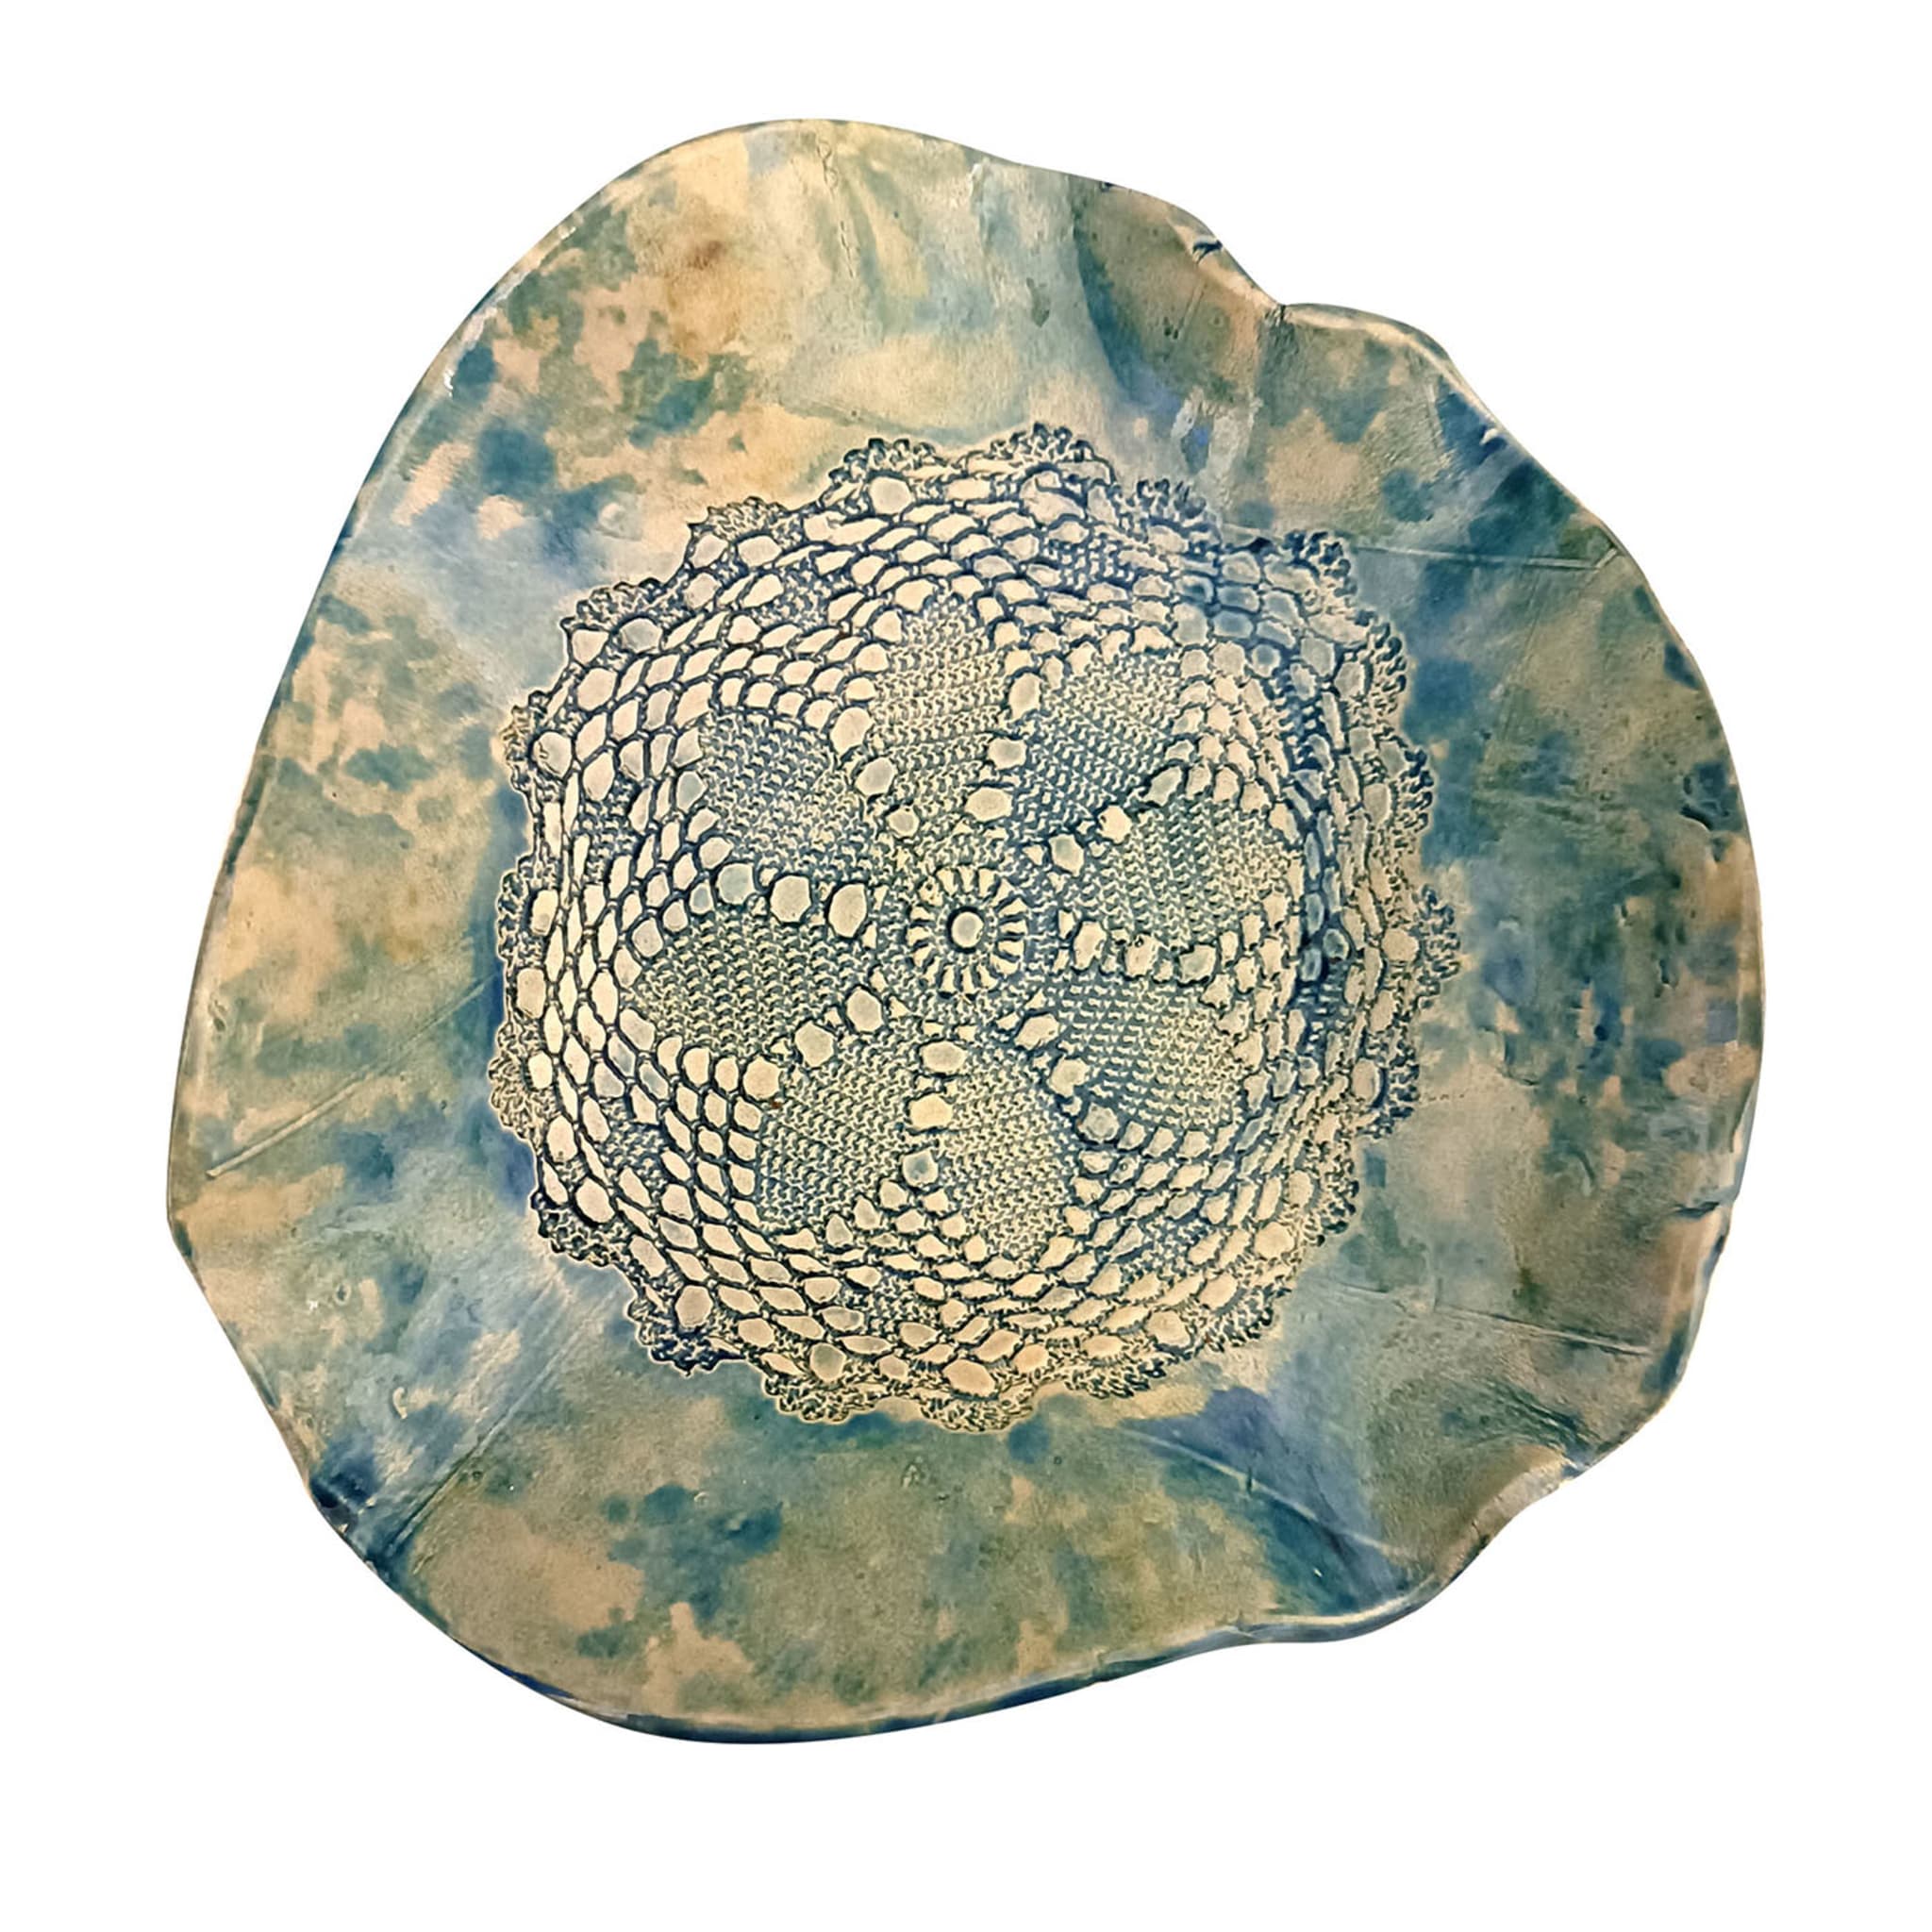 Dappled-Turquoise Decorative Plate with Crochet Motif - Main view